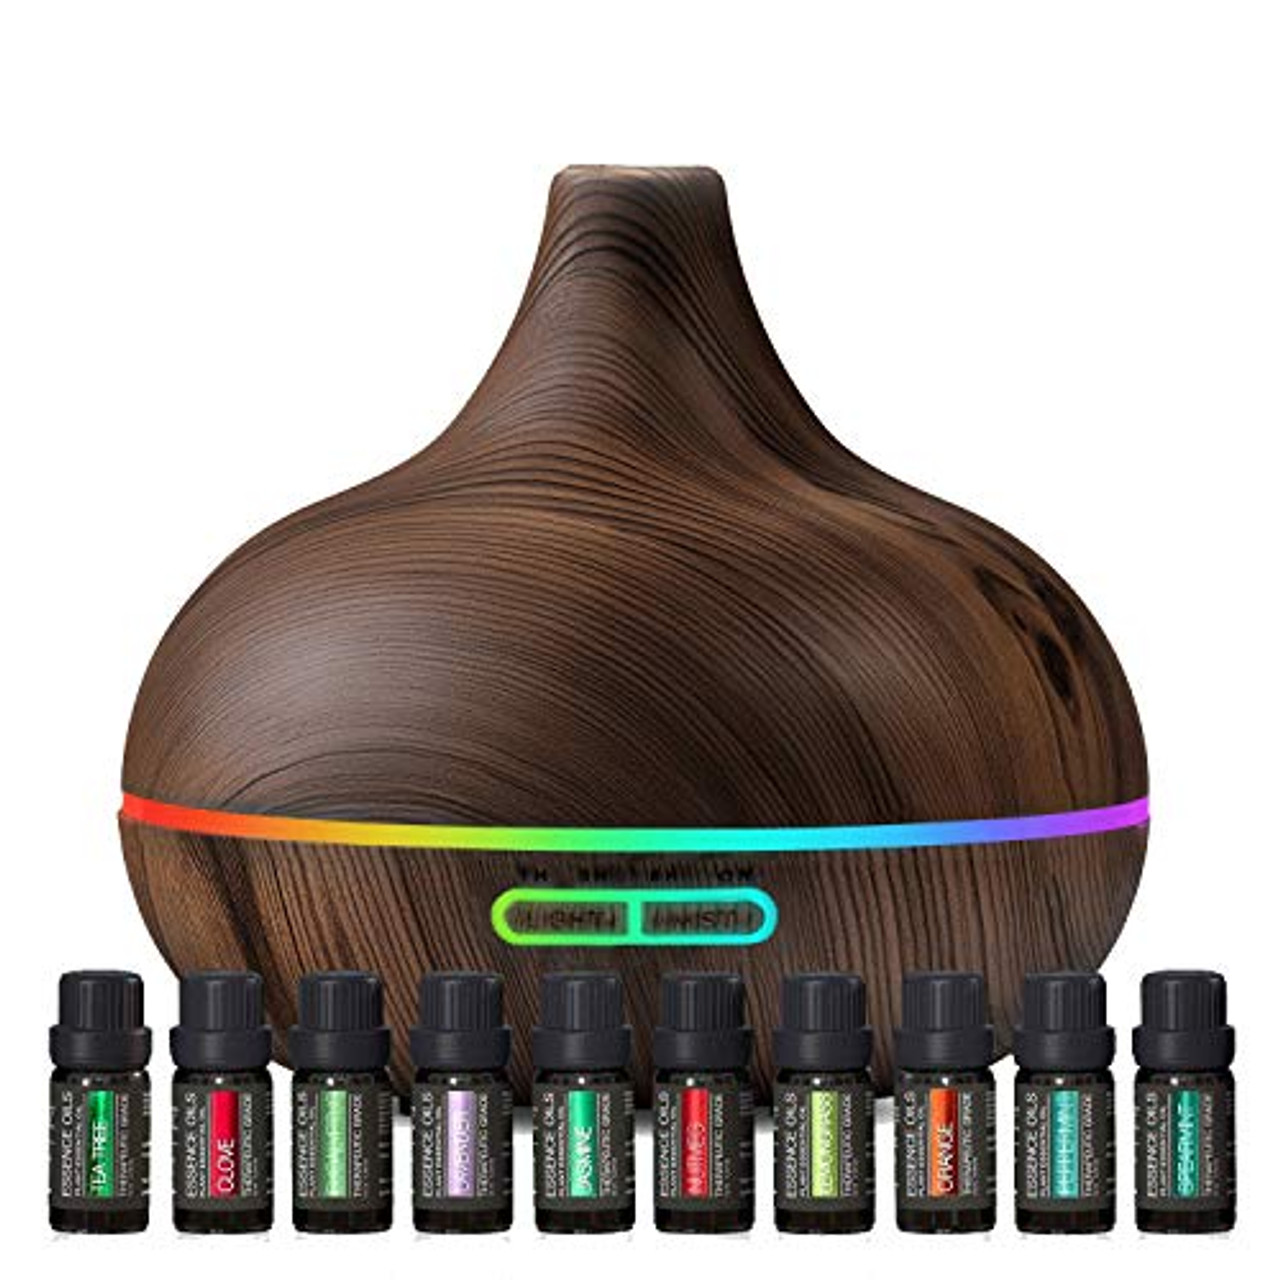 15 Best Essential Oil Diffusers - Top Diffusers for 2022